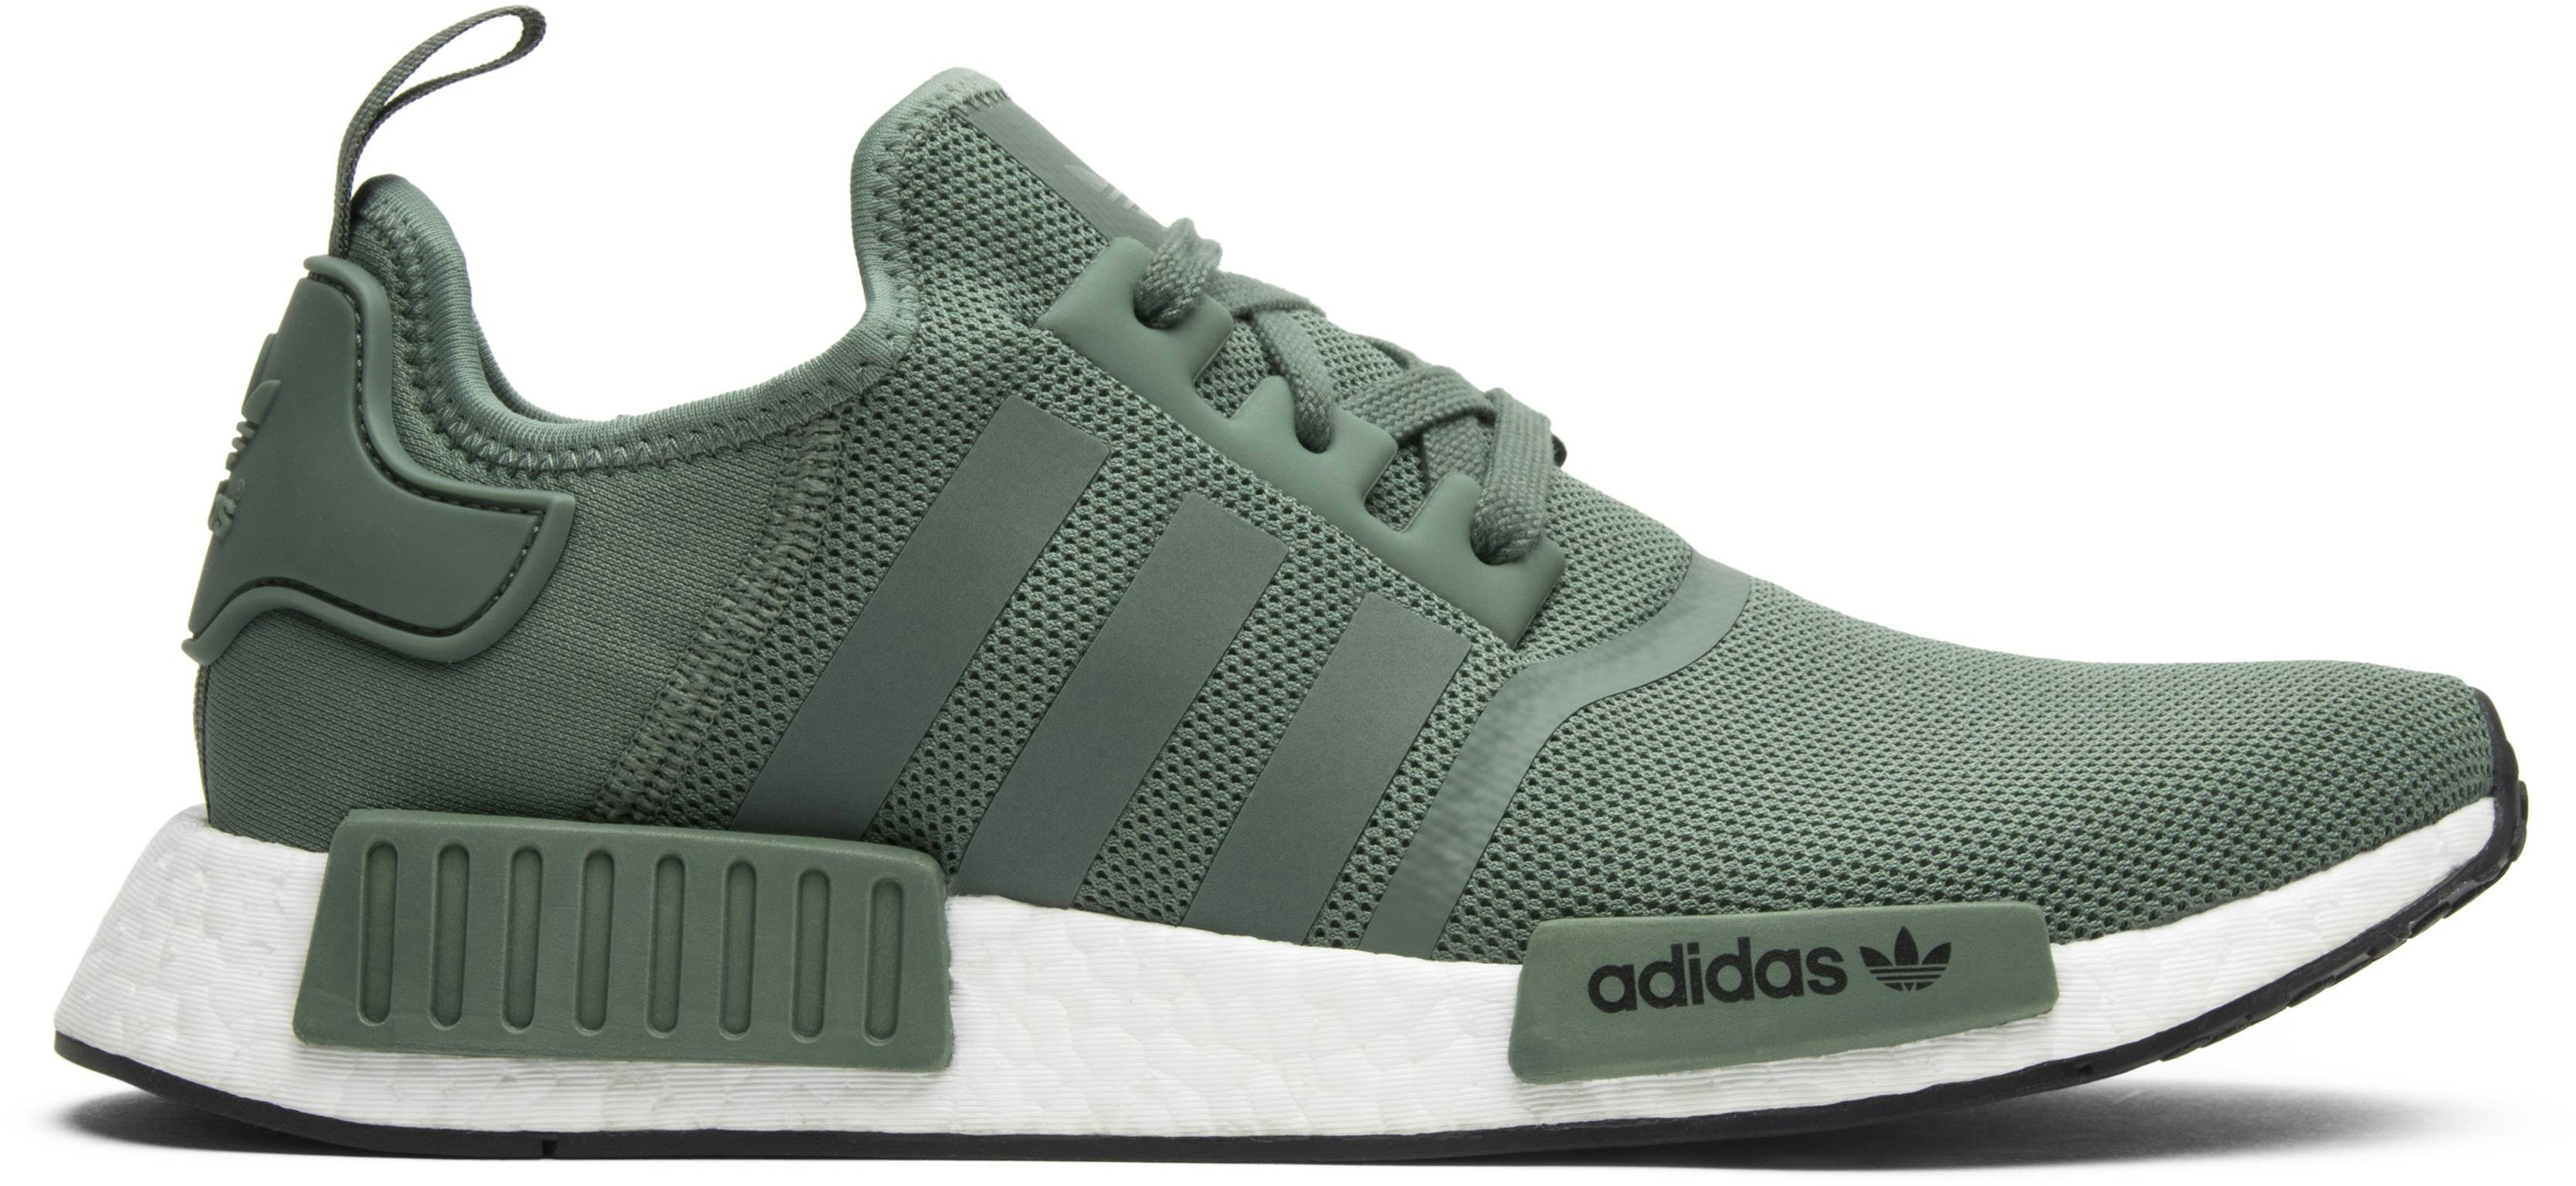 adidas NMD_R1 'Trace Green' - BY9692 - Novelship